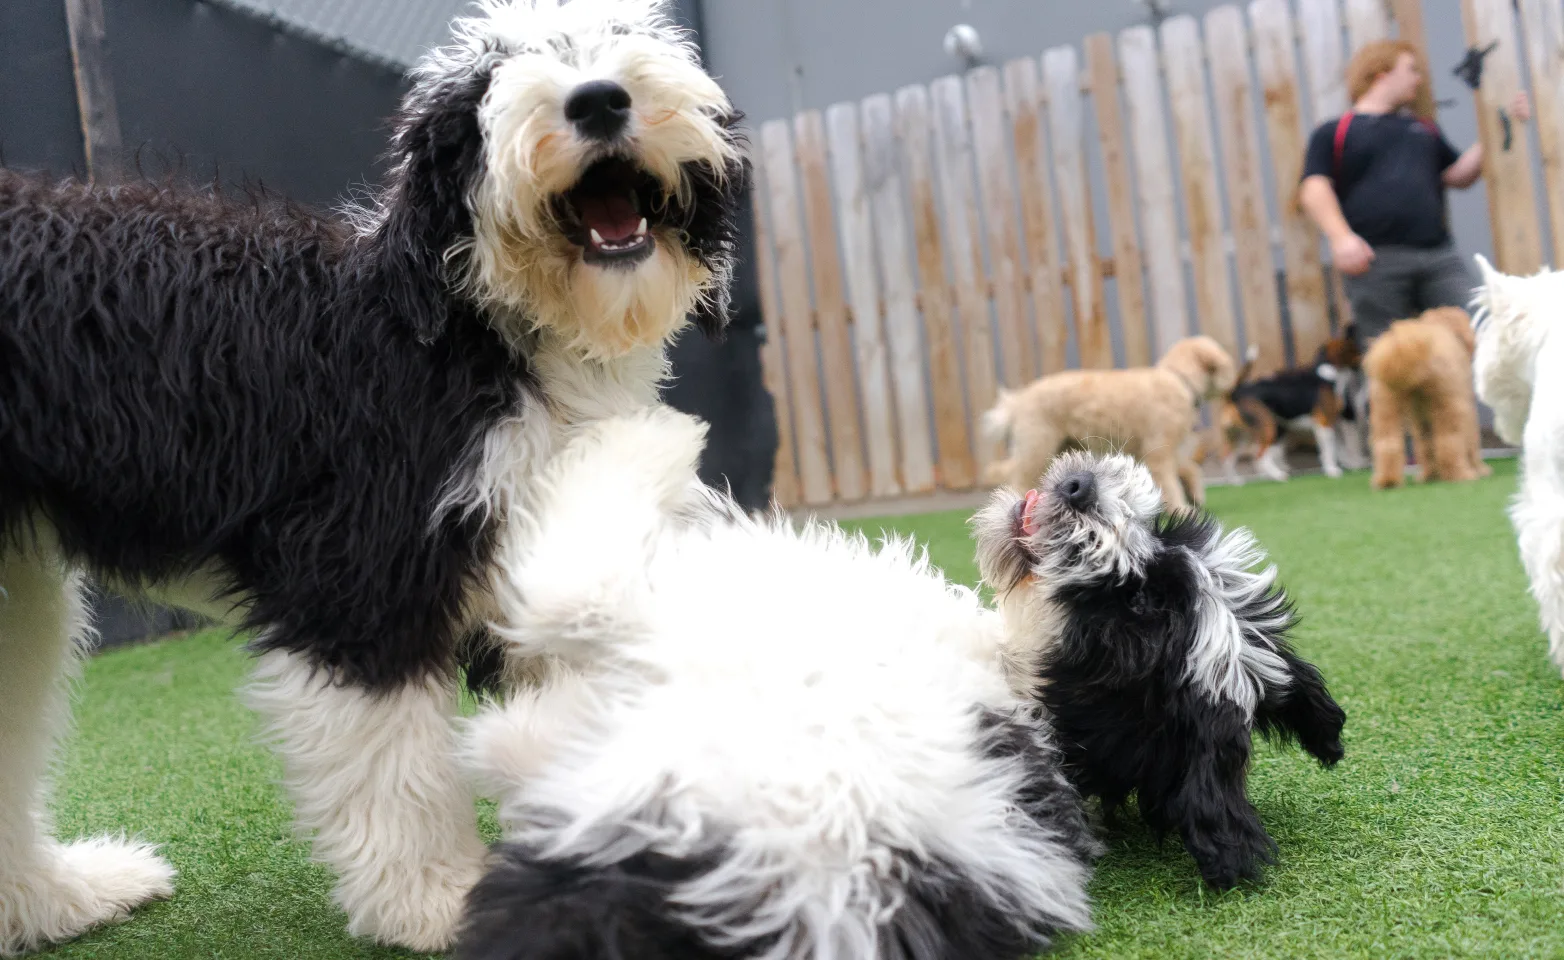 Dogs playing on grass at daycare